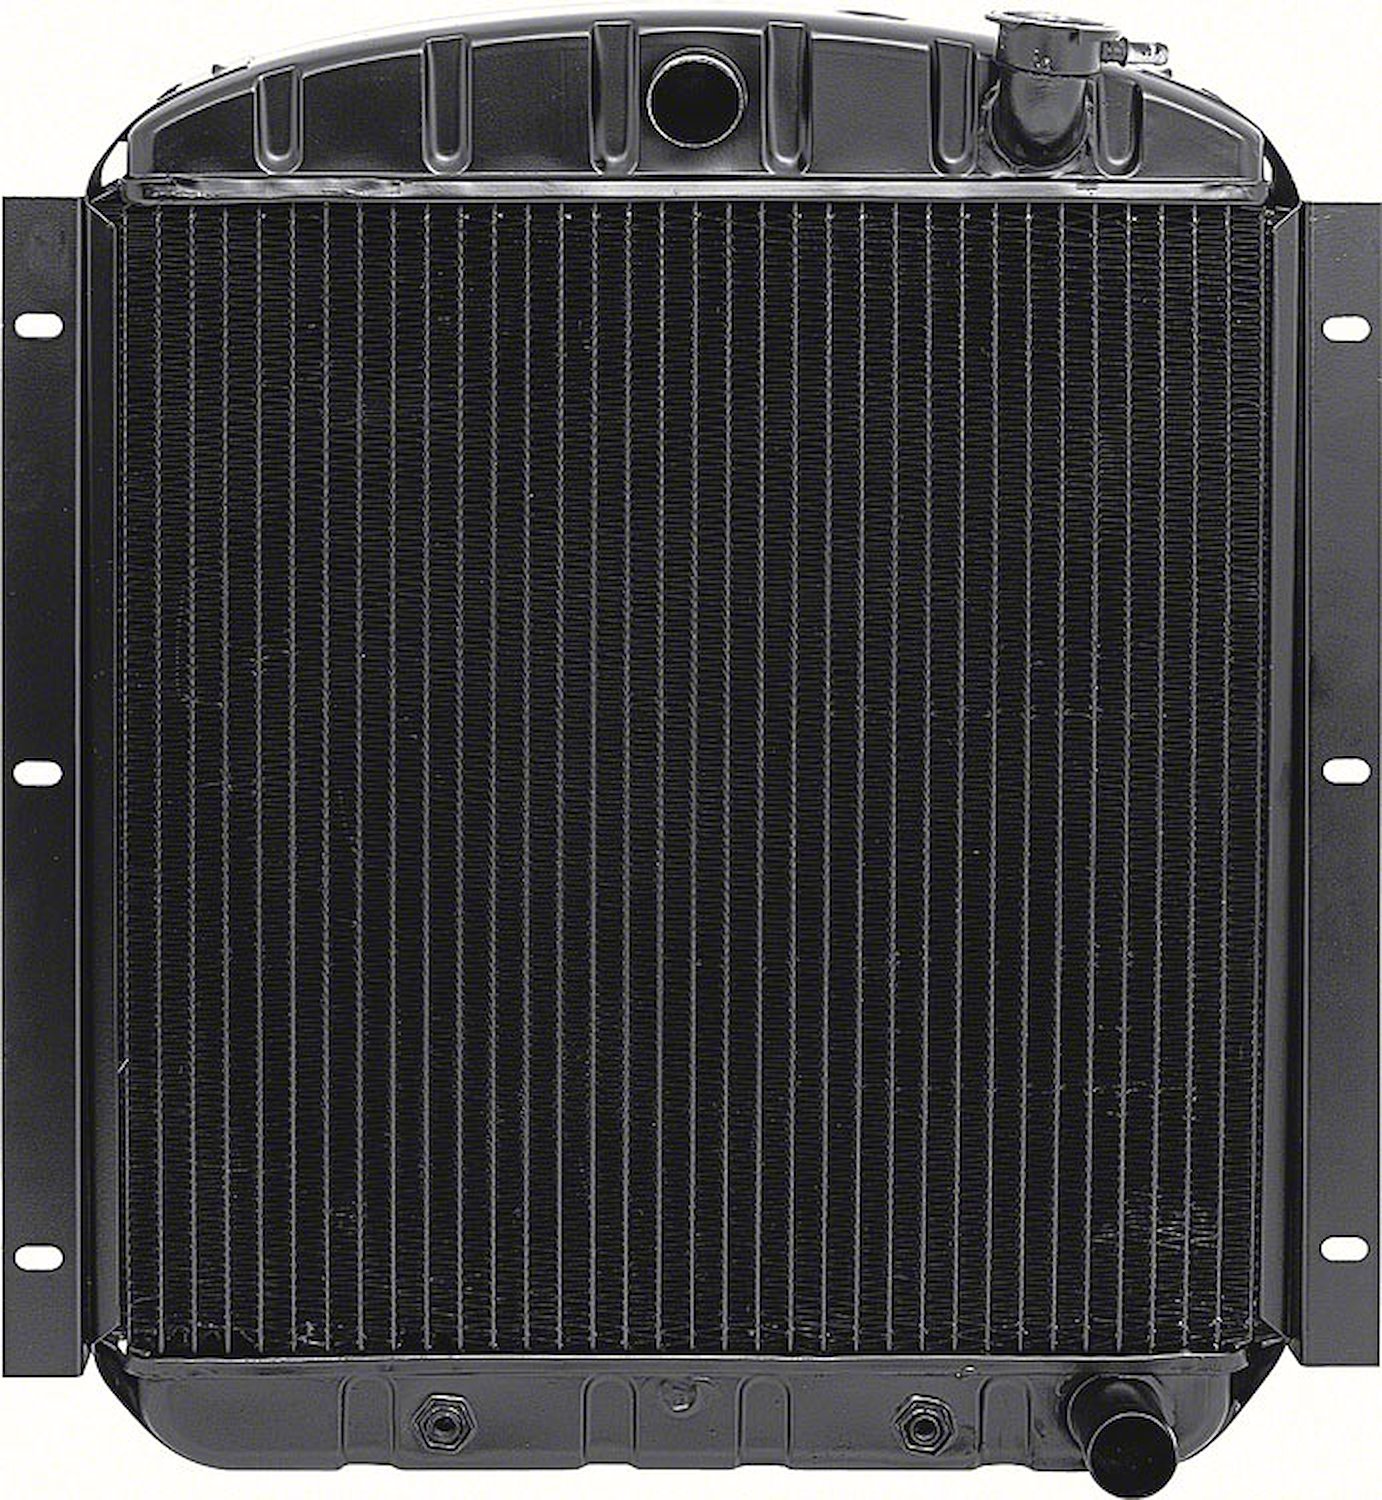 CRD9803A Radiator 1955-59 GMC 3/4 Ton L6/V8 With AT 4 Row Copper/Brass (19-7/8" x 23-1/2" x 2-5/8" Core)